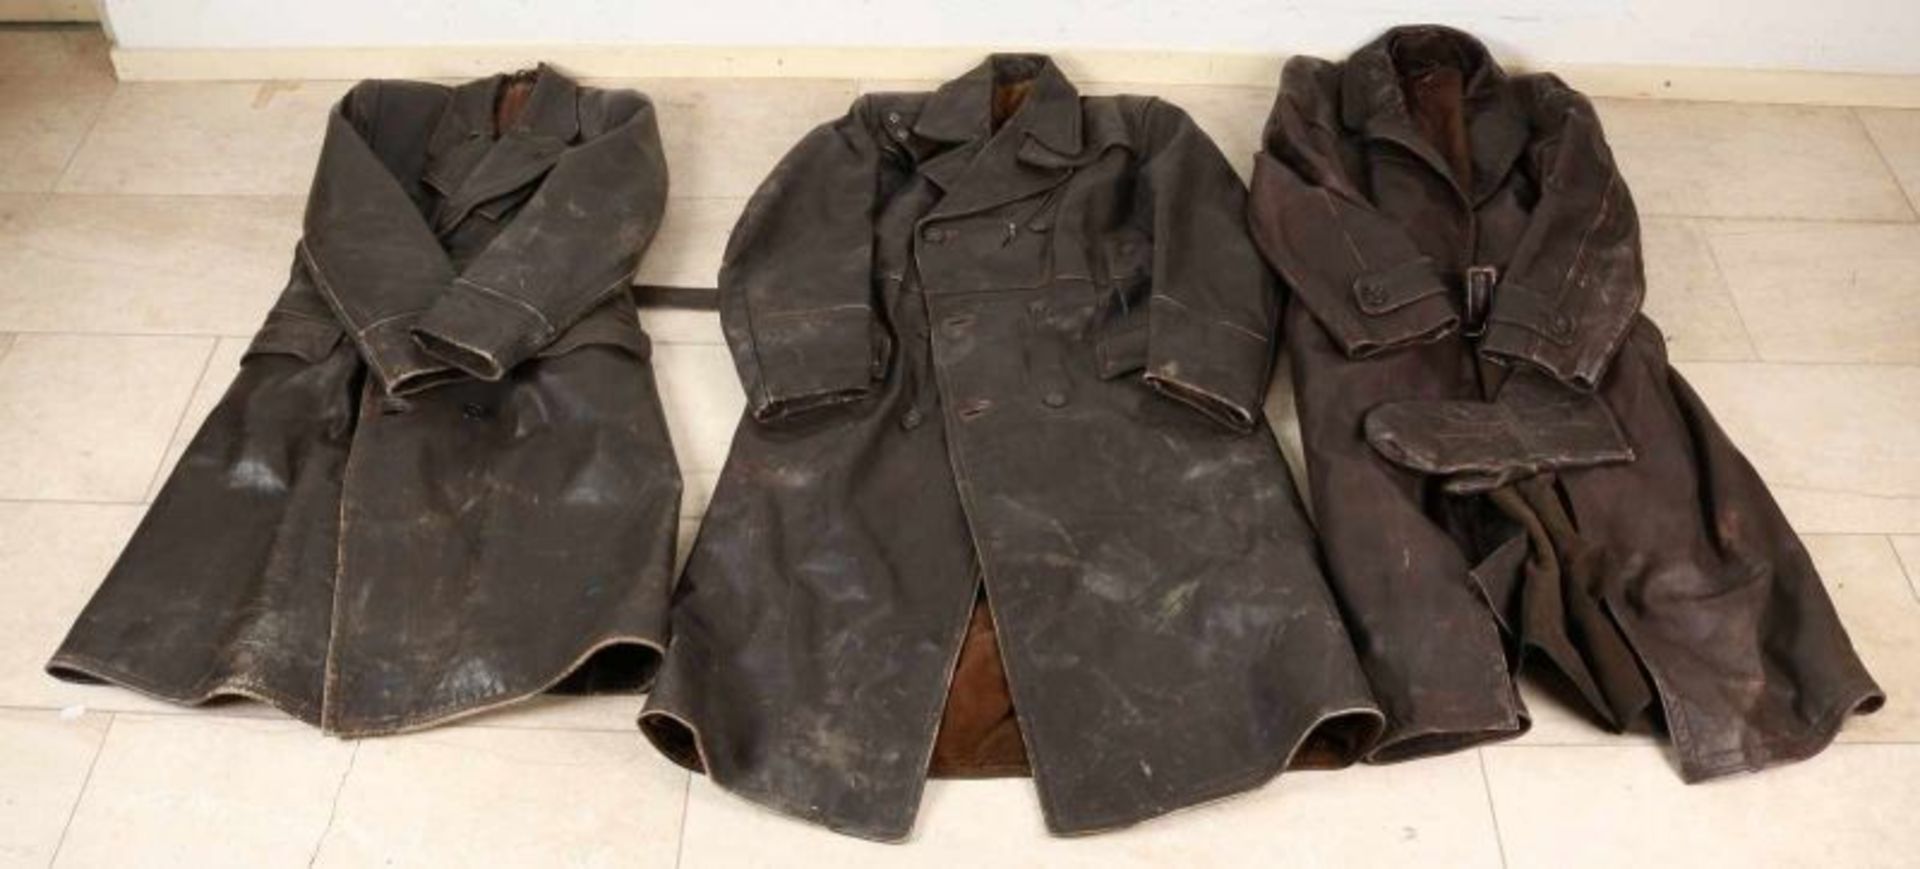 Three old leather motorcycle jackets. Circa 1930 - 1960. 20th Century. Size: Large. Traces of use.